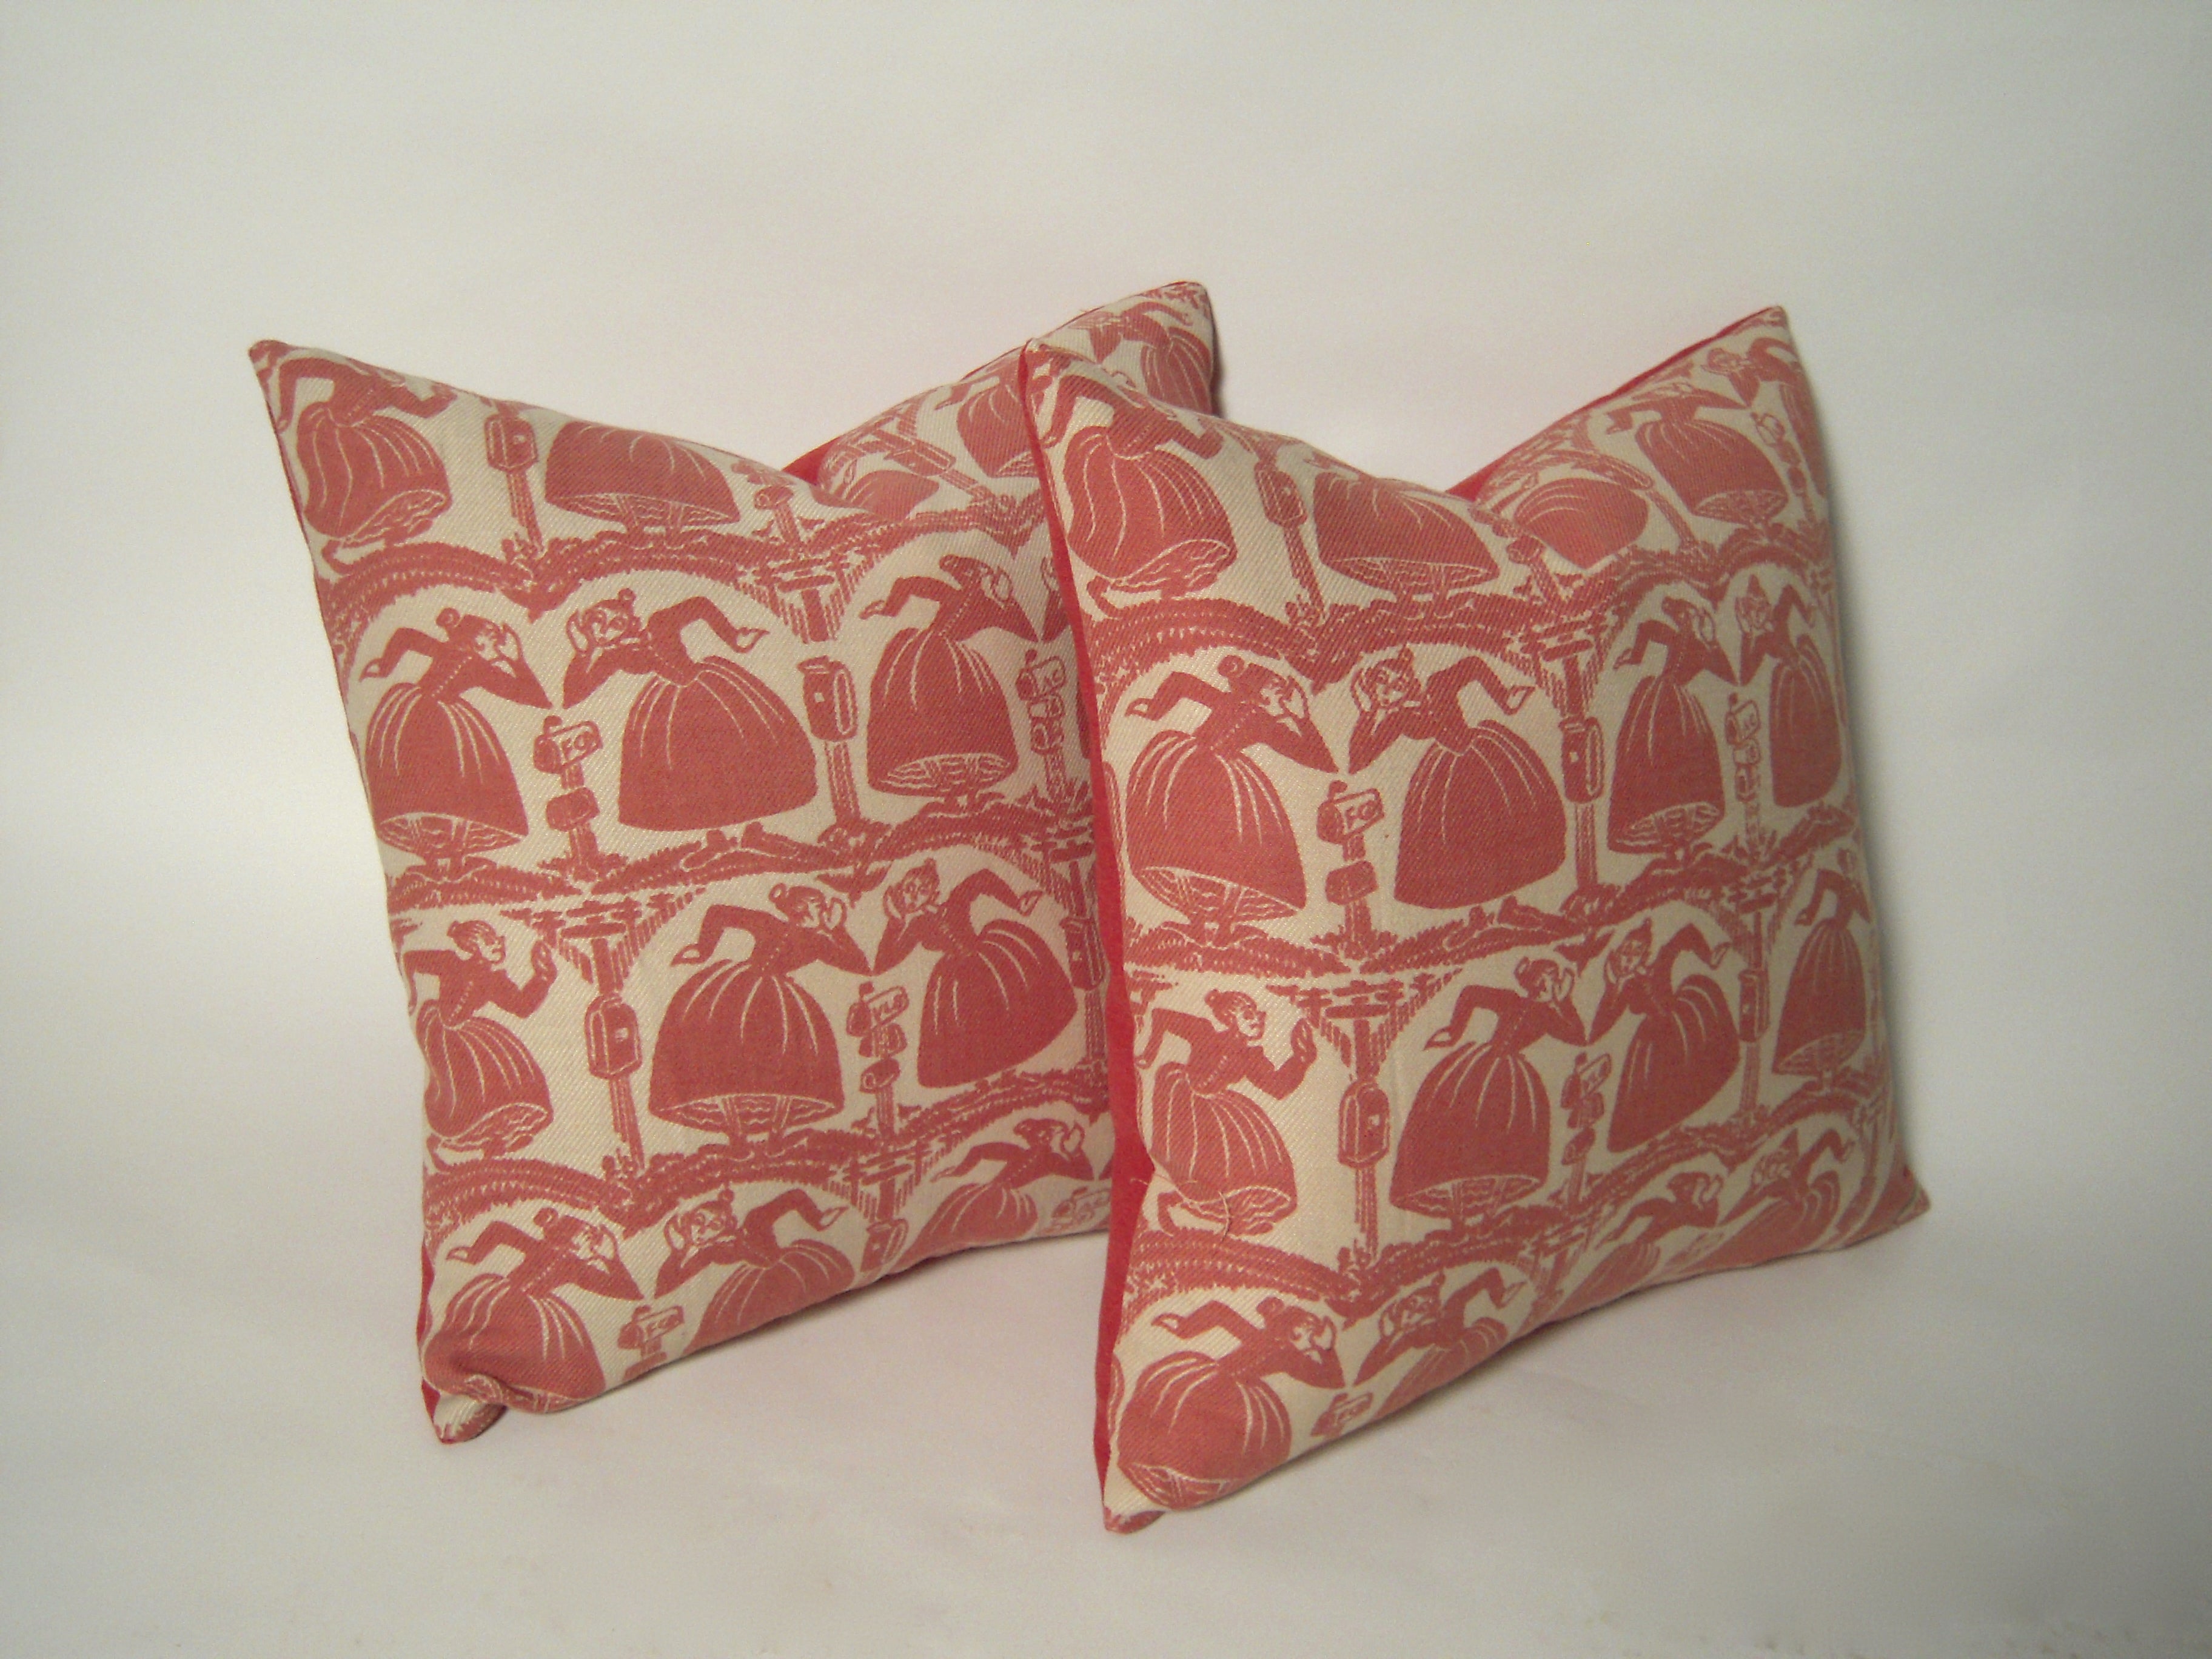 Pair of Folly Cove Designers Gossip Pillows, c. 1940s-60s